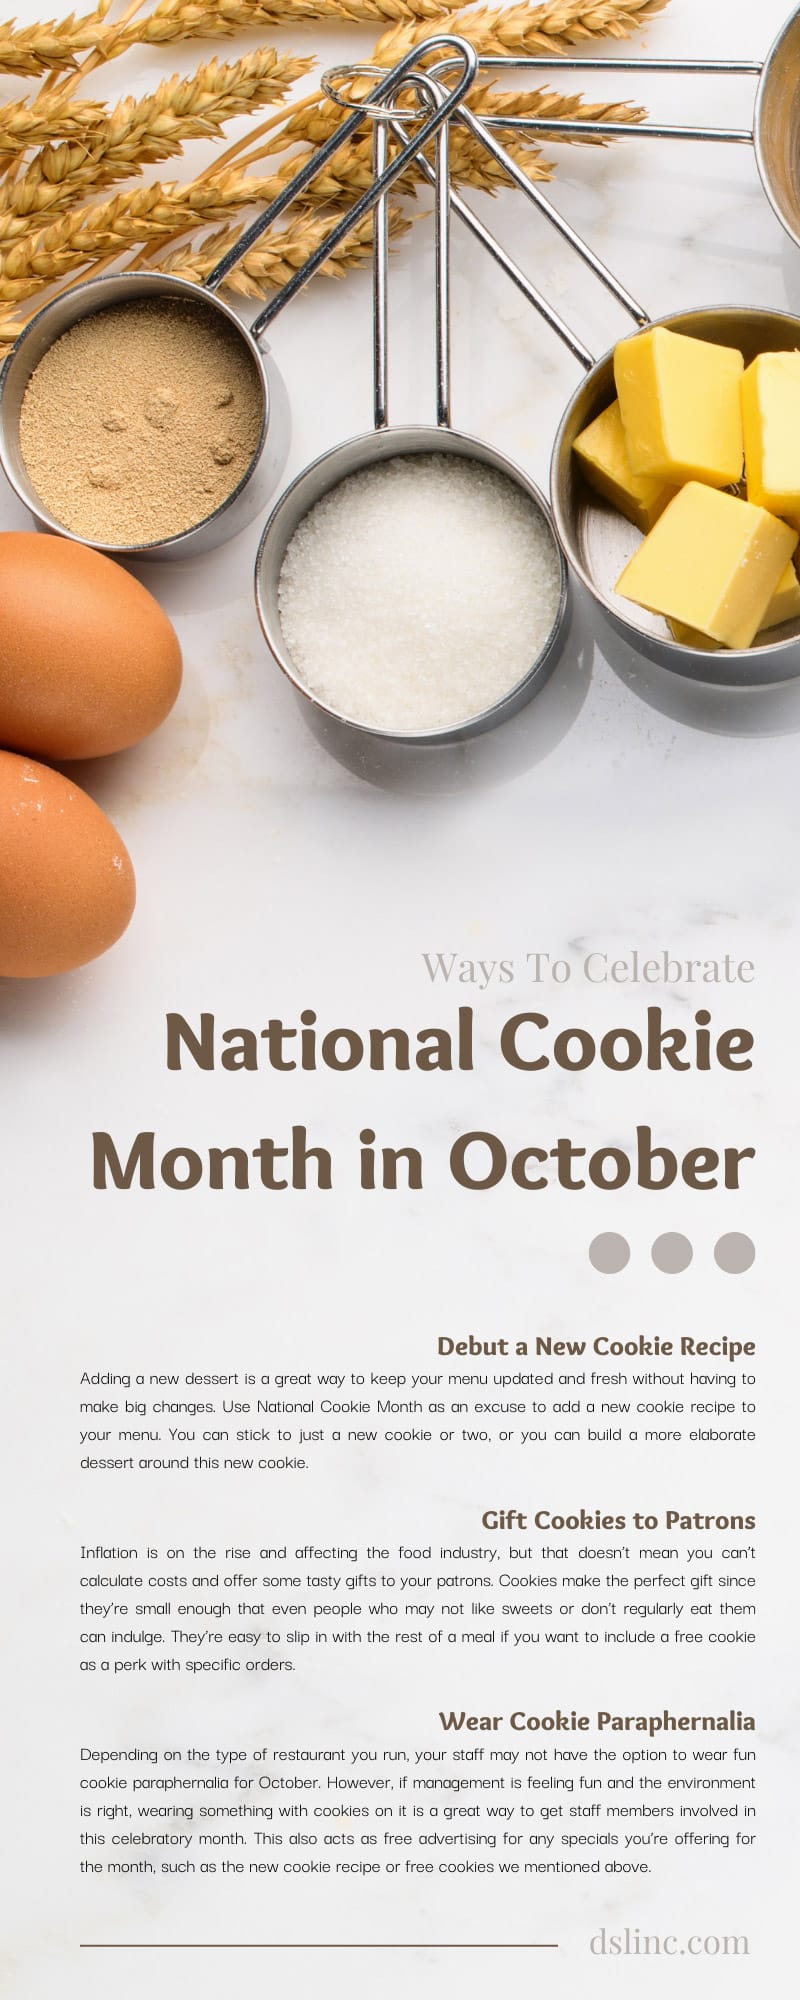 5 Ways To Celebrate National Cookie Month in October